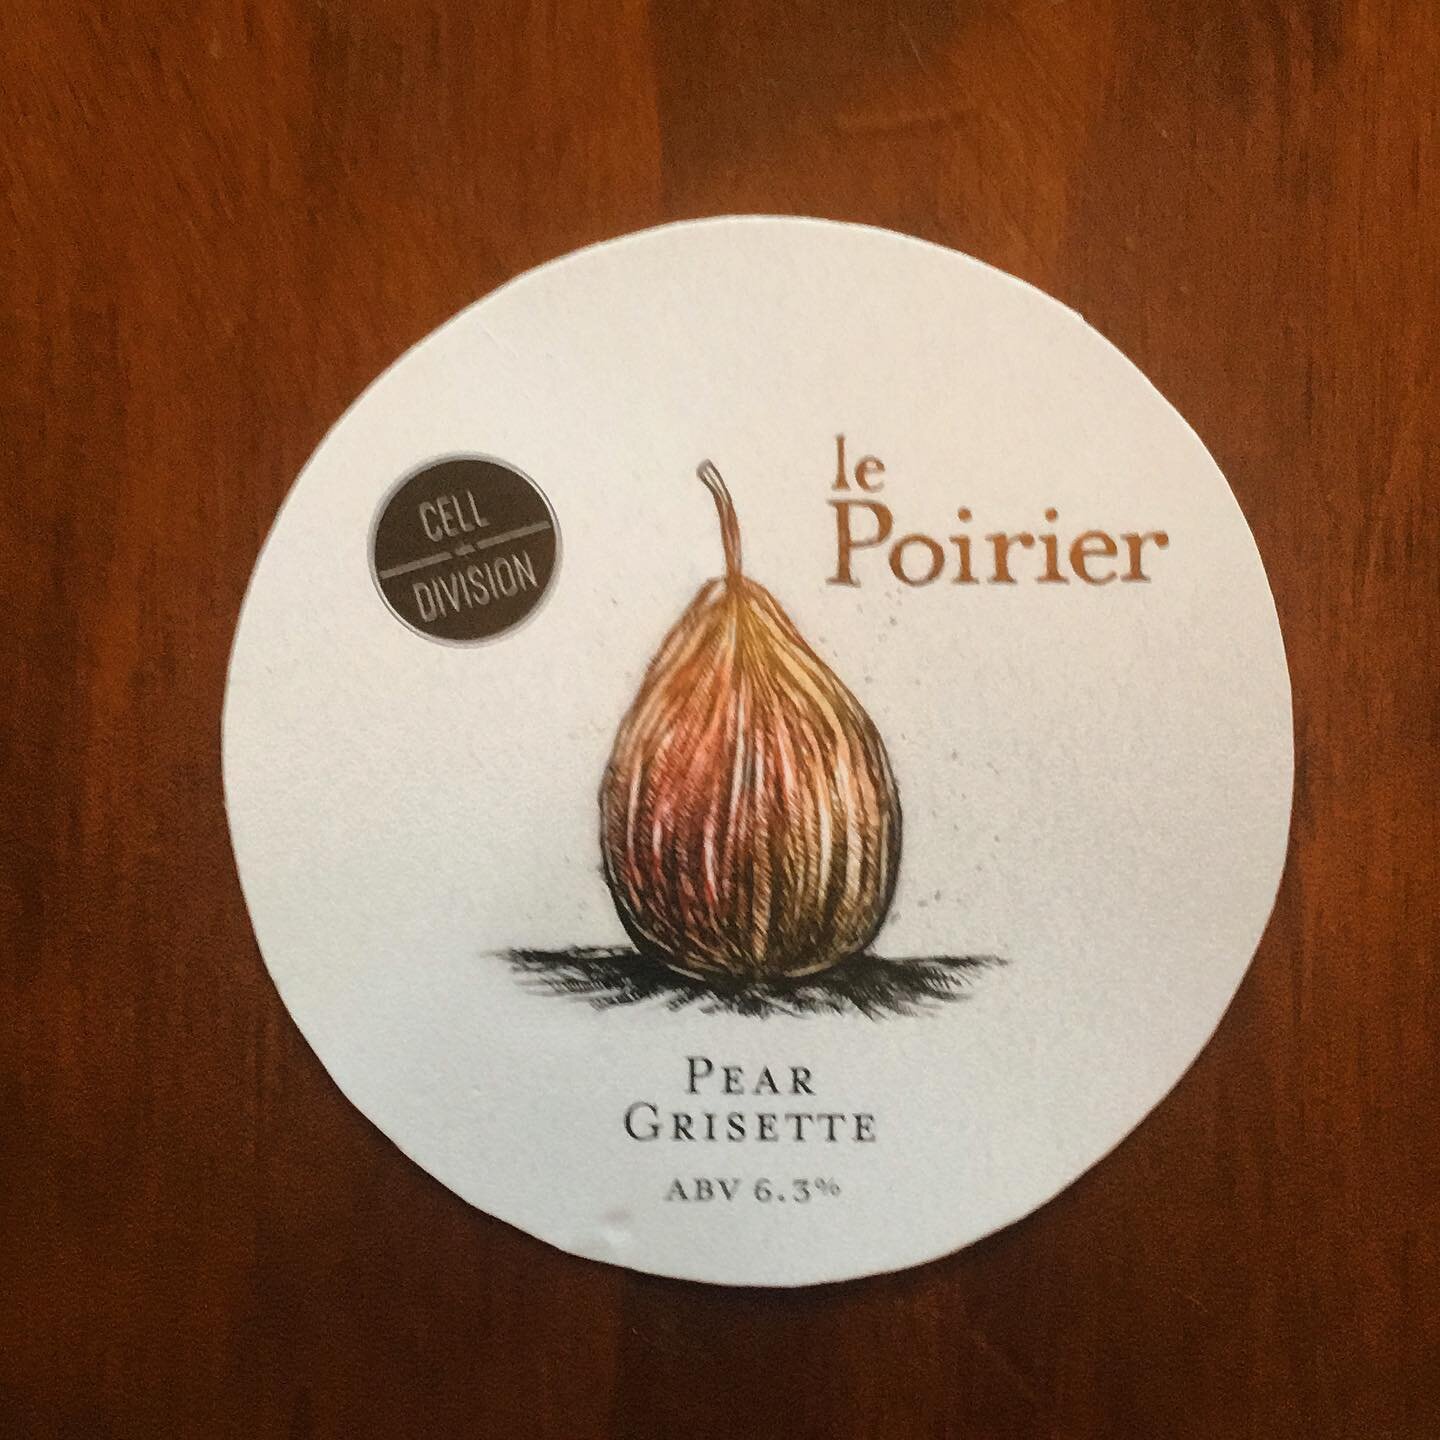 On the naughty tap today @celldivisionbrewery Le Poirier.